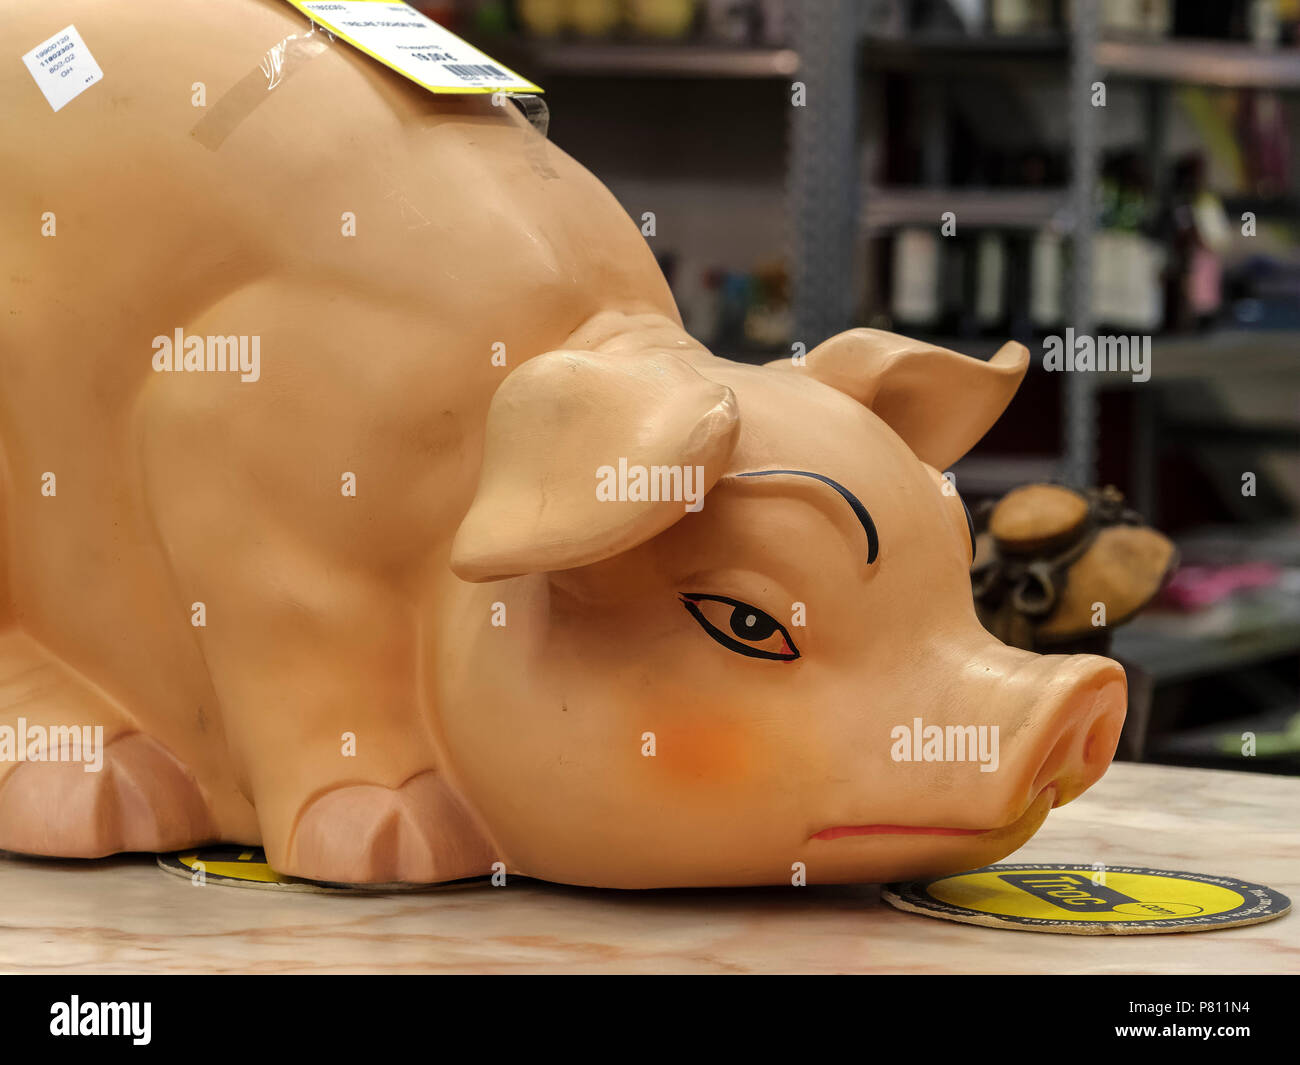 plastic pig, Troc second hand shop: 83, Rue Hollerich , Luxembourg, Luxembourg City, Europe Stock Photo